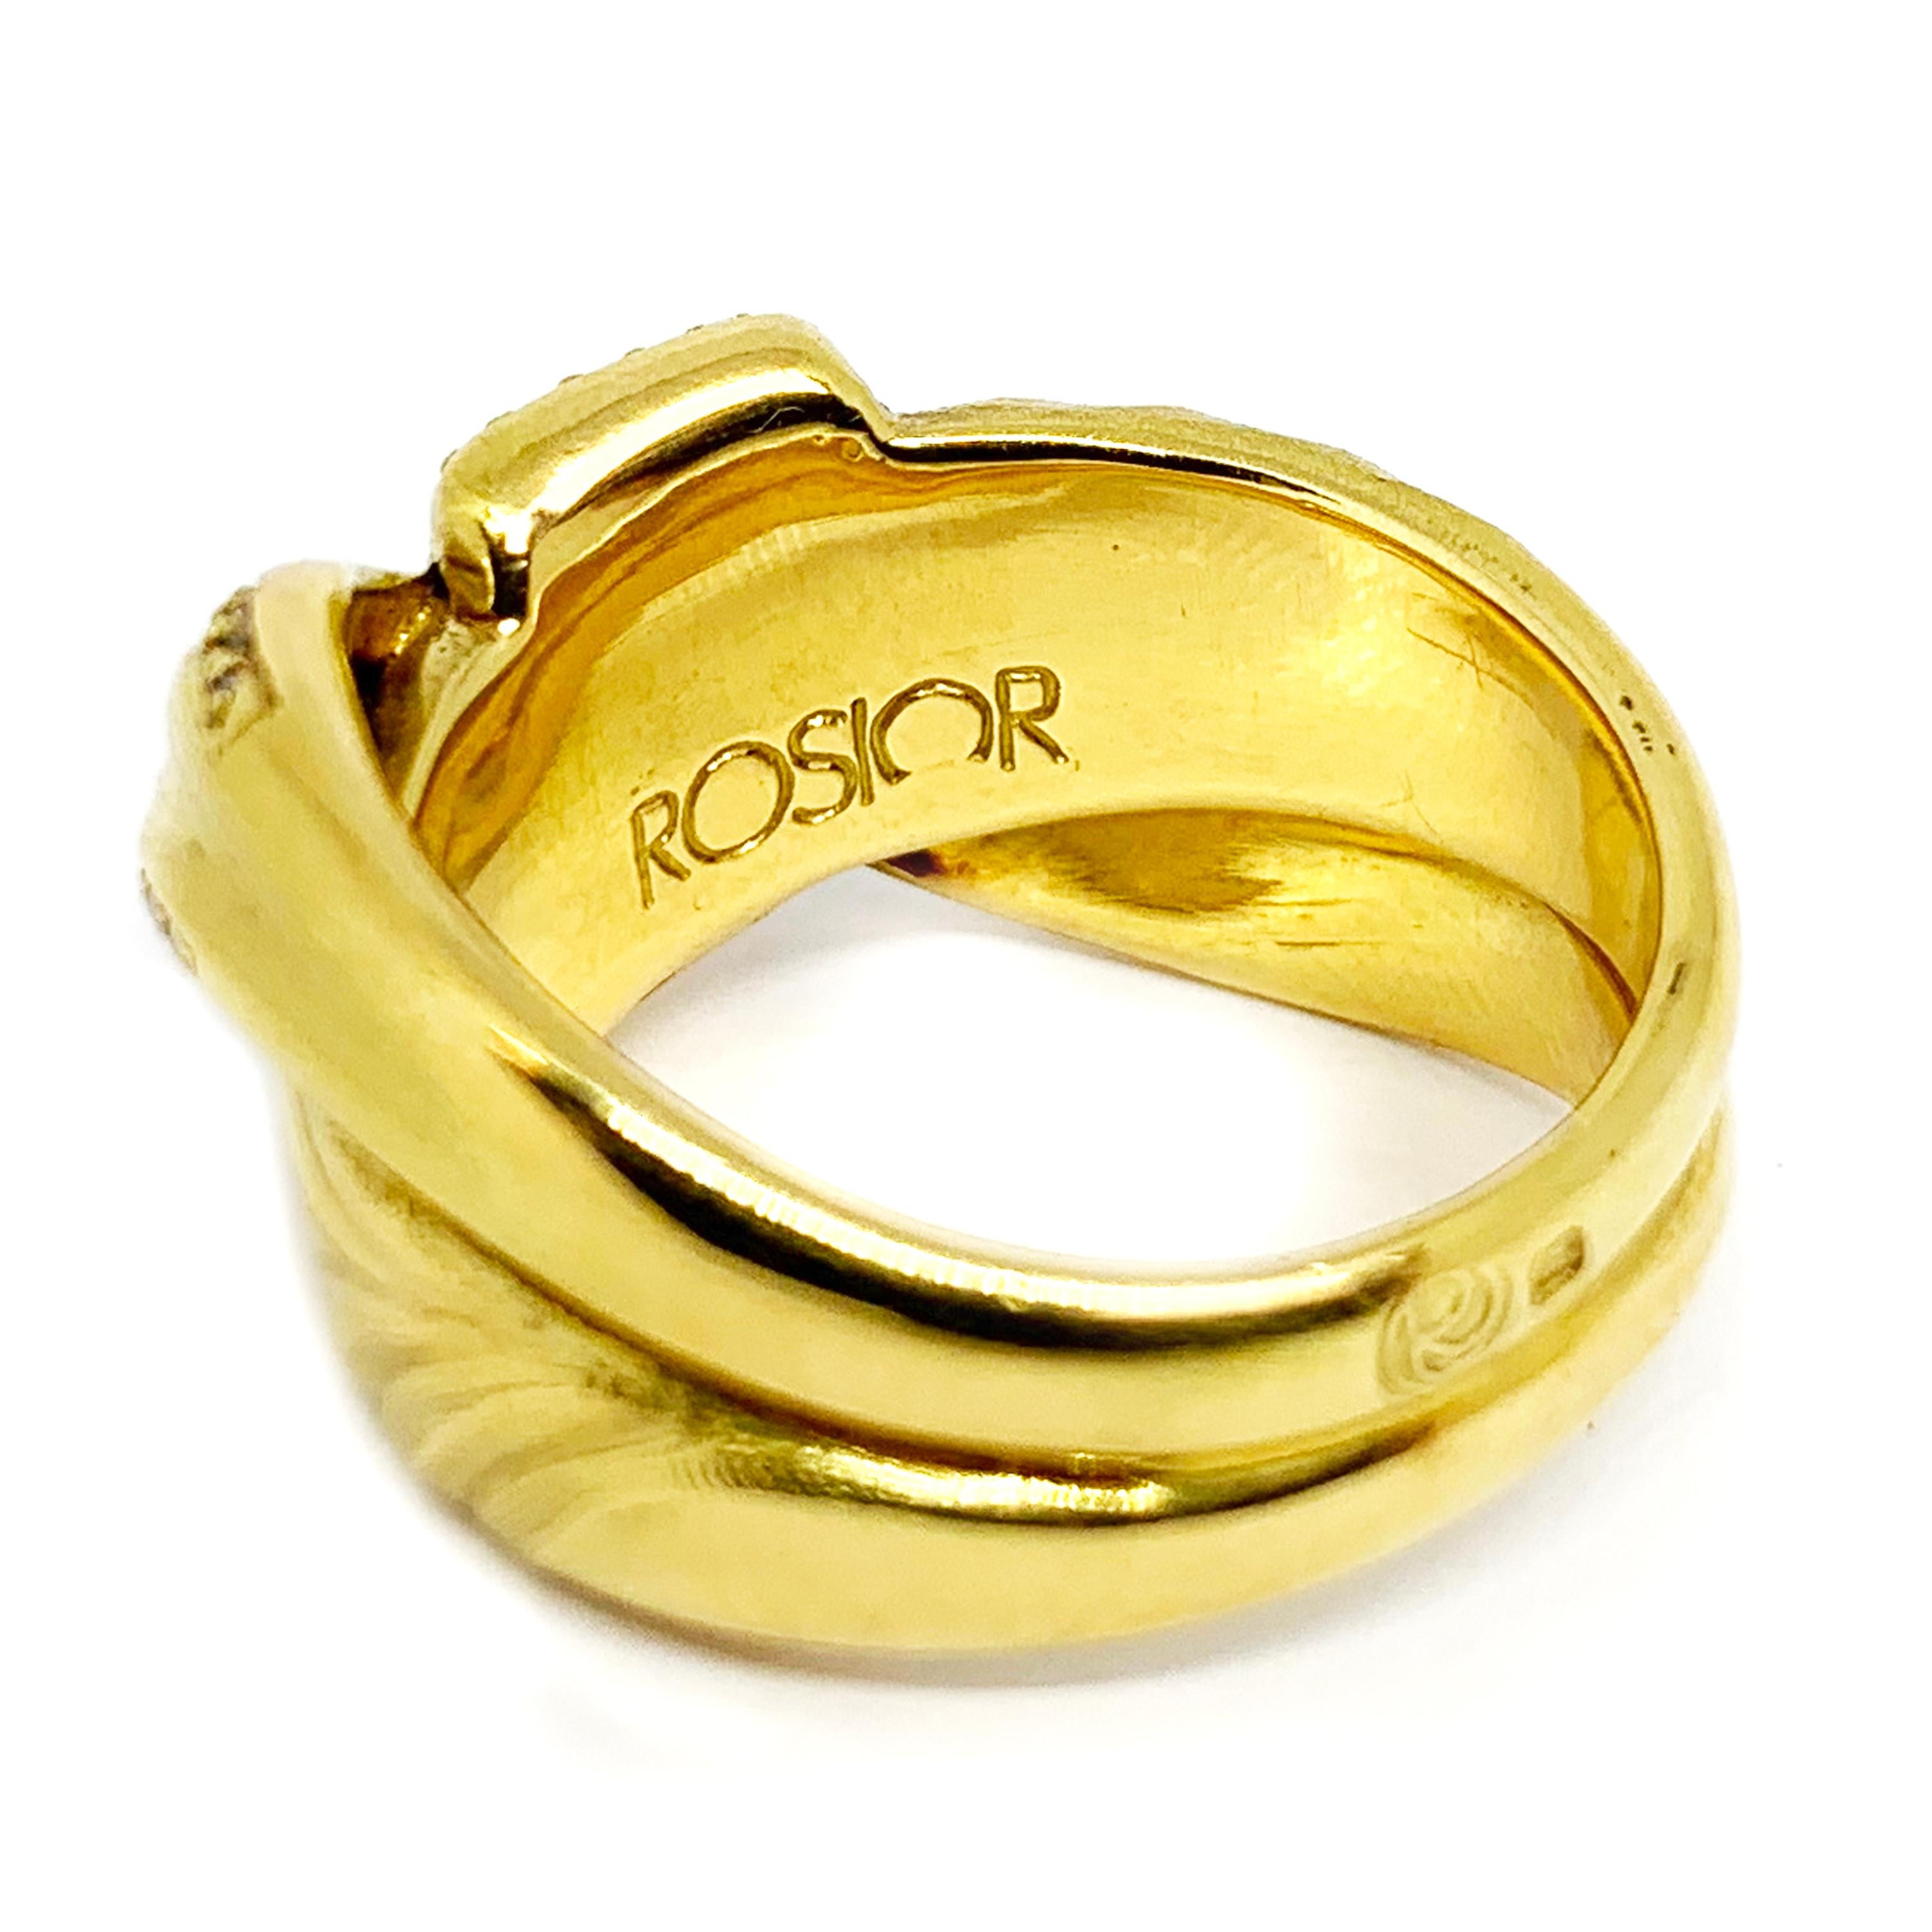 Contemporary Rosior one-off Diamond Ring set on Hand Engraved Yellow Gold For Sale